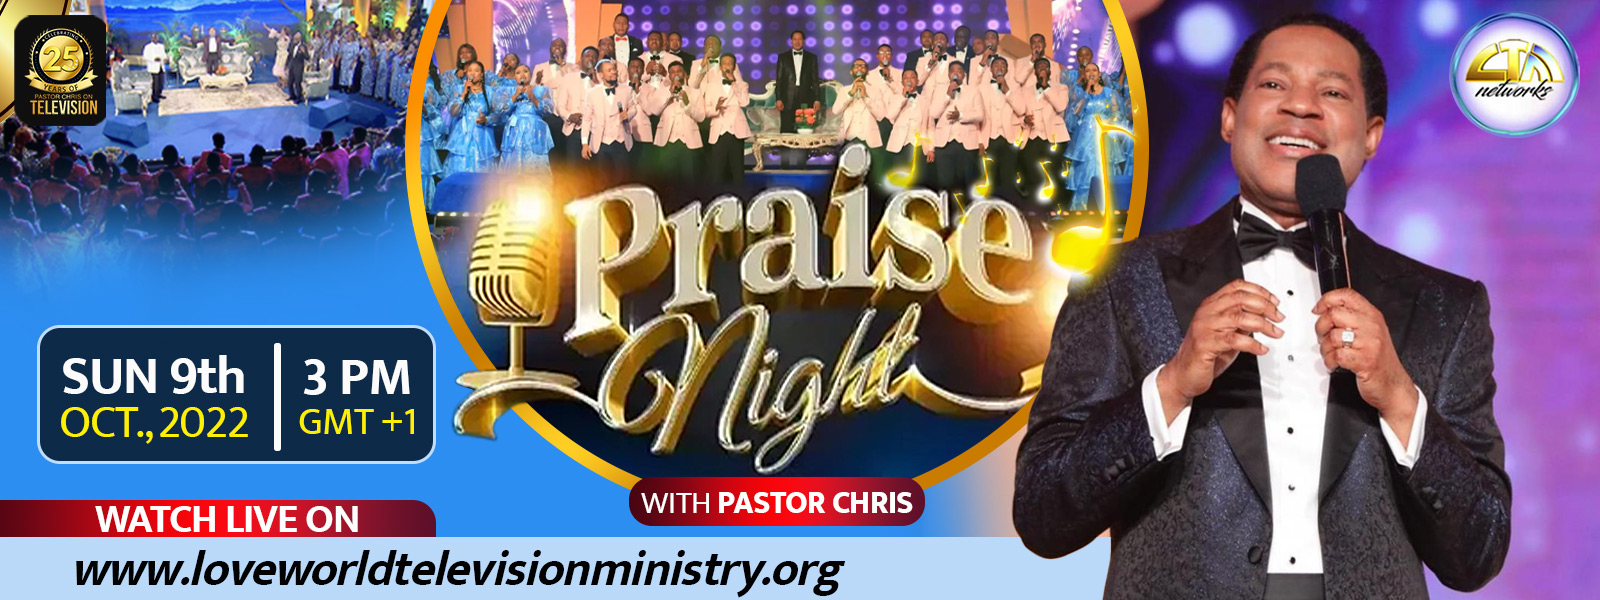 PRAISE NIGHT WITH PASTOR CHRIS OCTOBER EDITION 